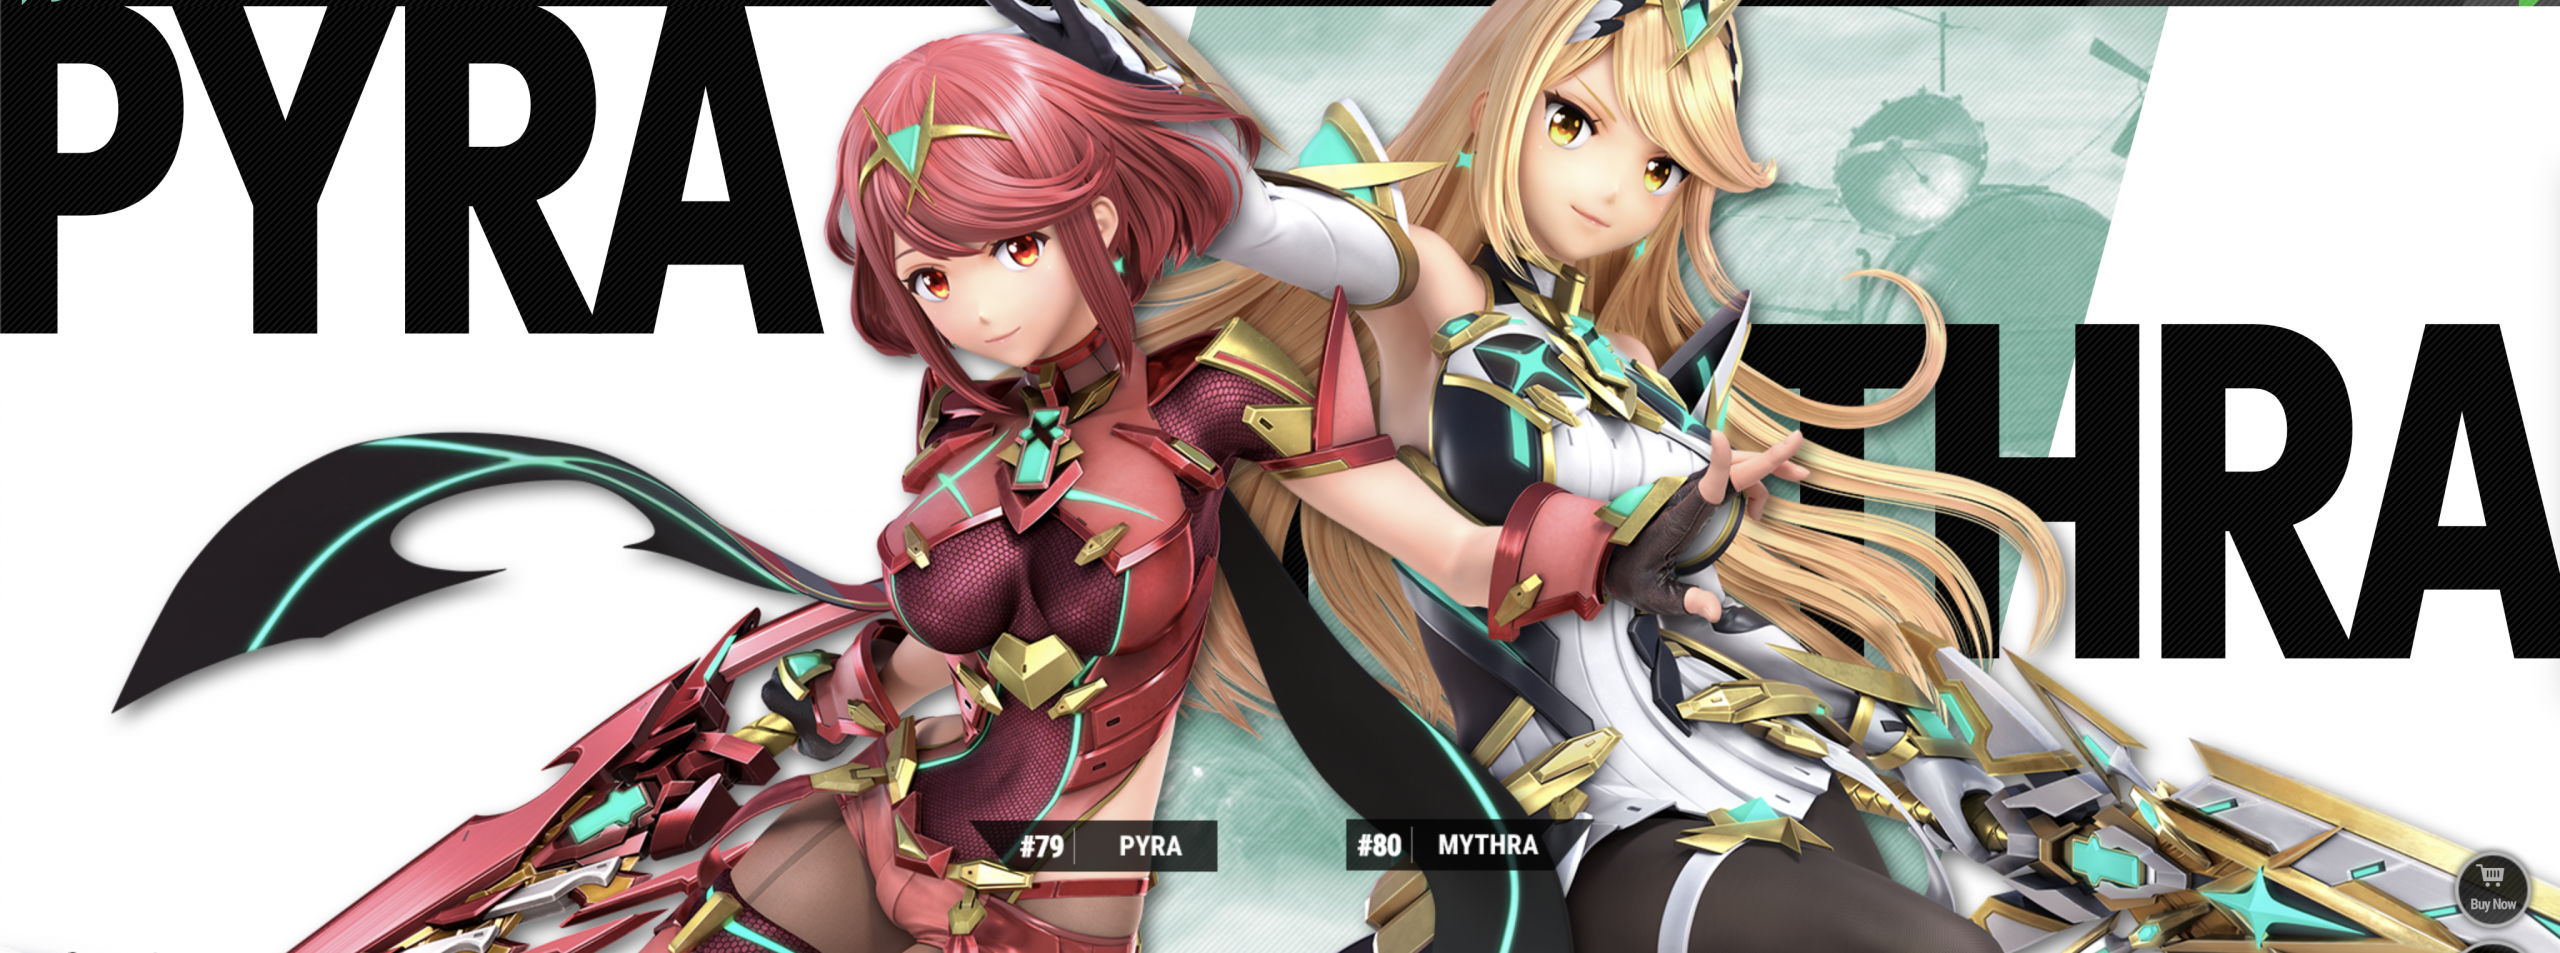 Super Smash Bros. Ultimate’s Latest Character is Pyra / Mythra